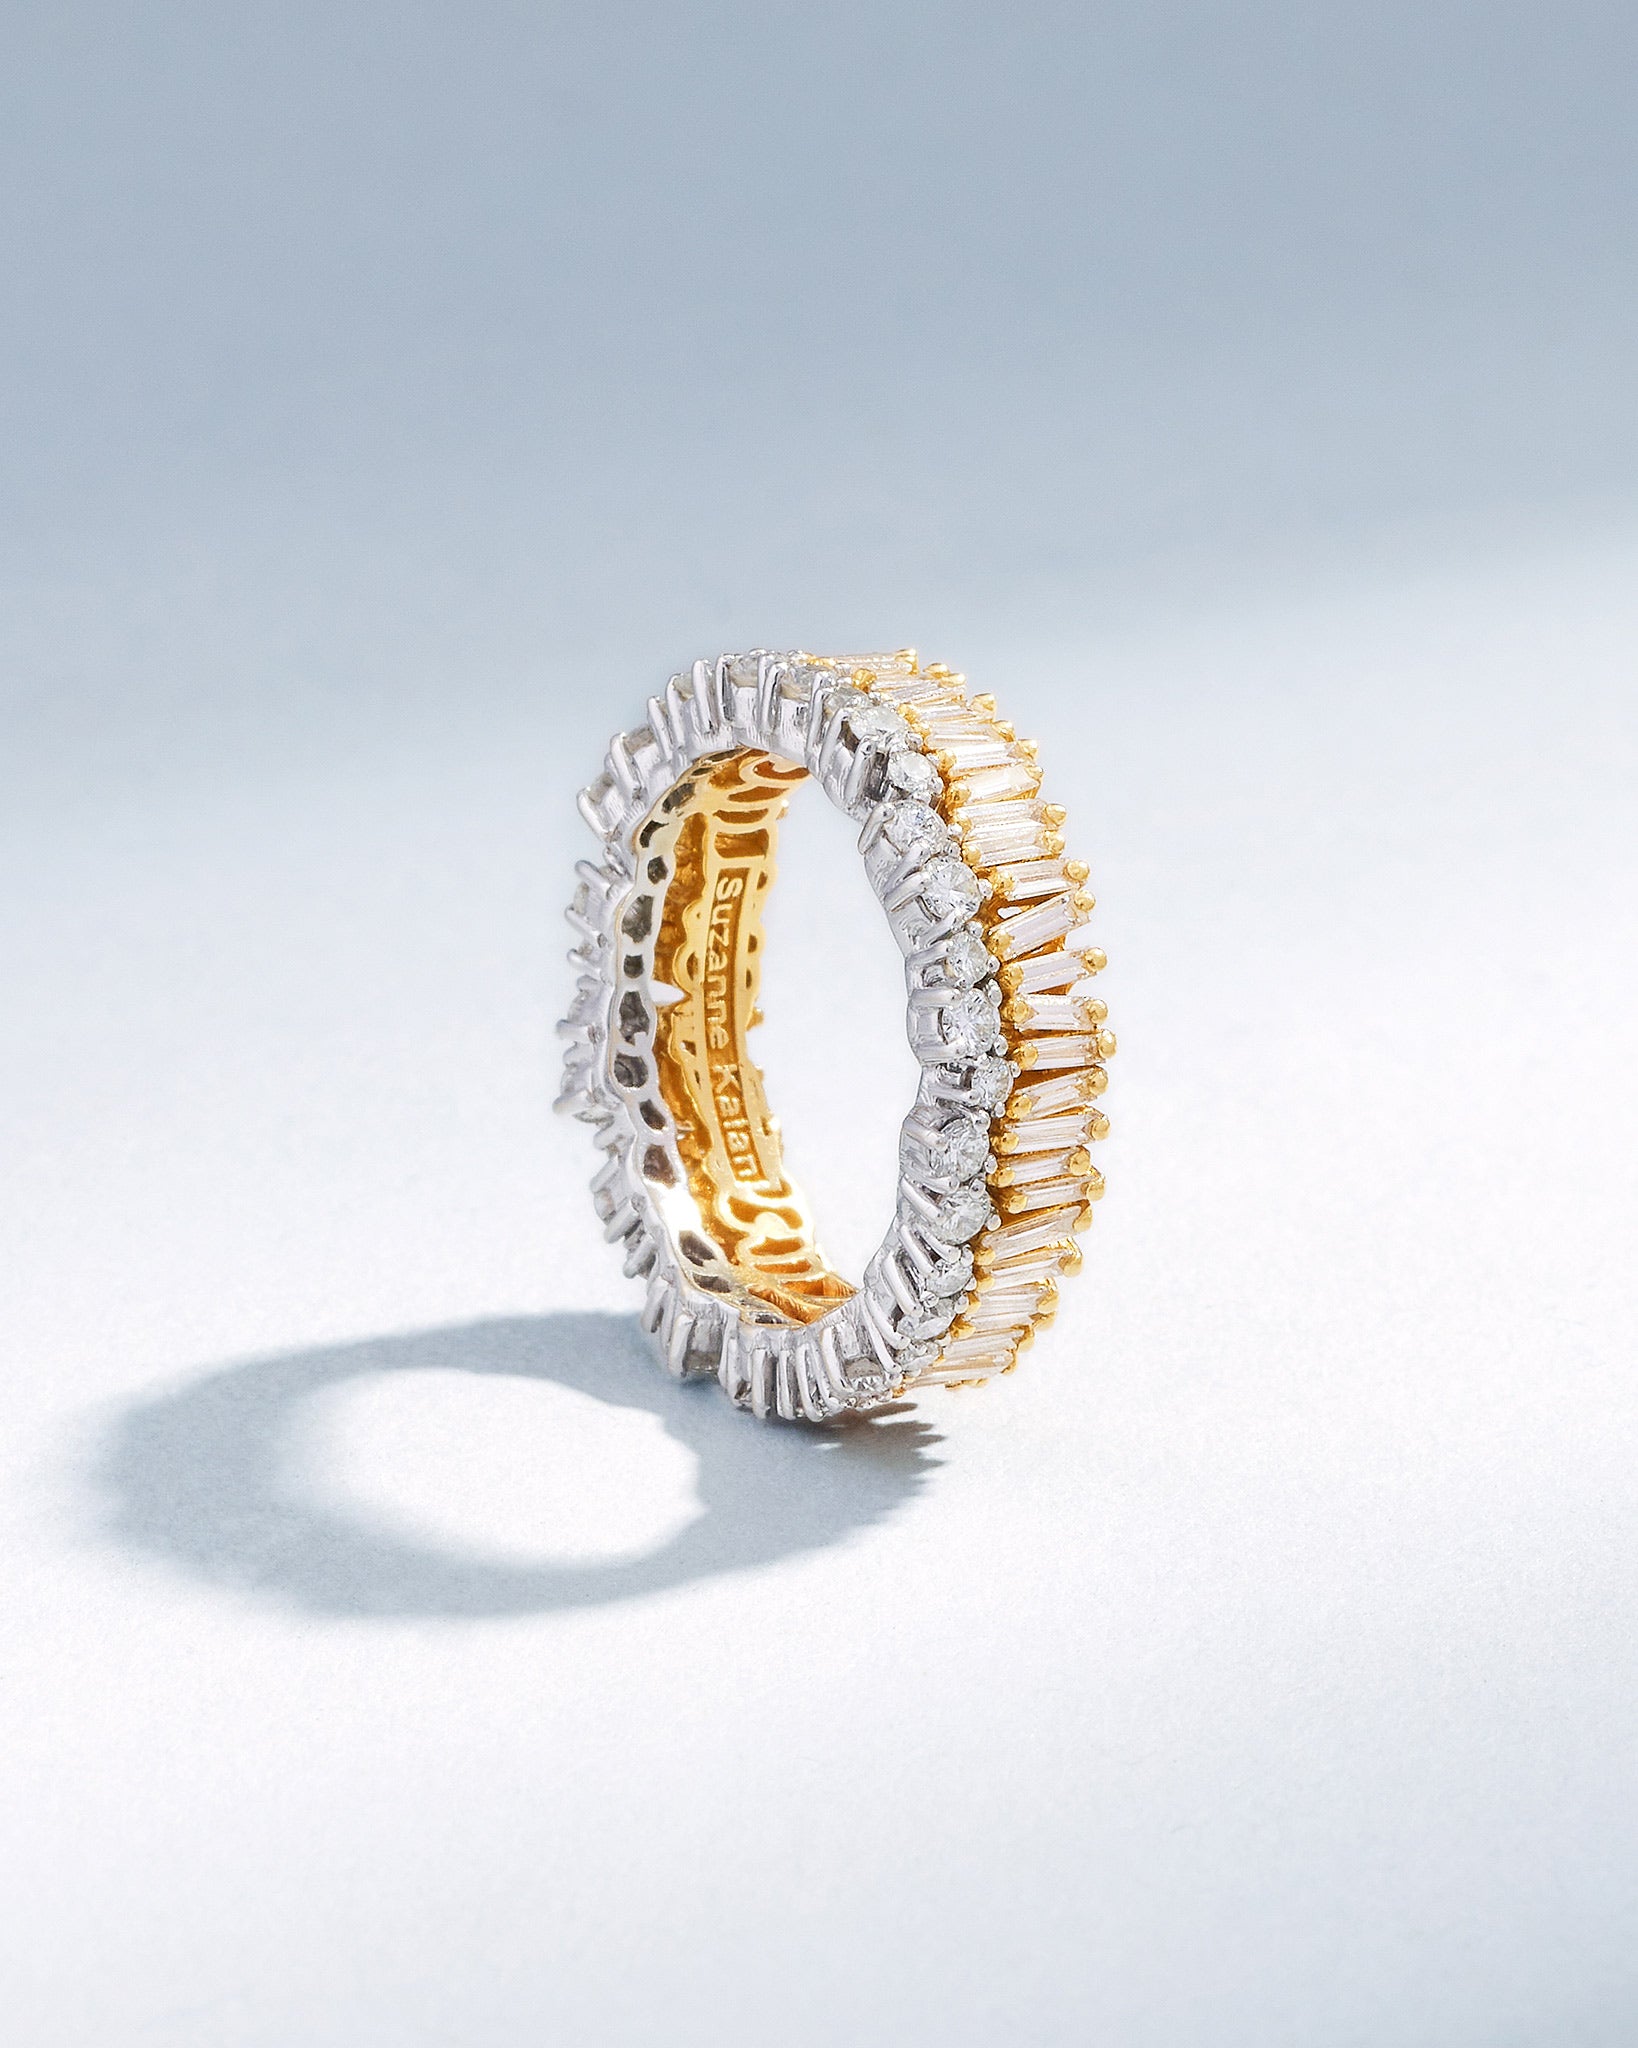 Suzanne Kalan Classic Diamond Short Stack Eternity Band in 18k two-tone yellow and white gold